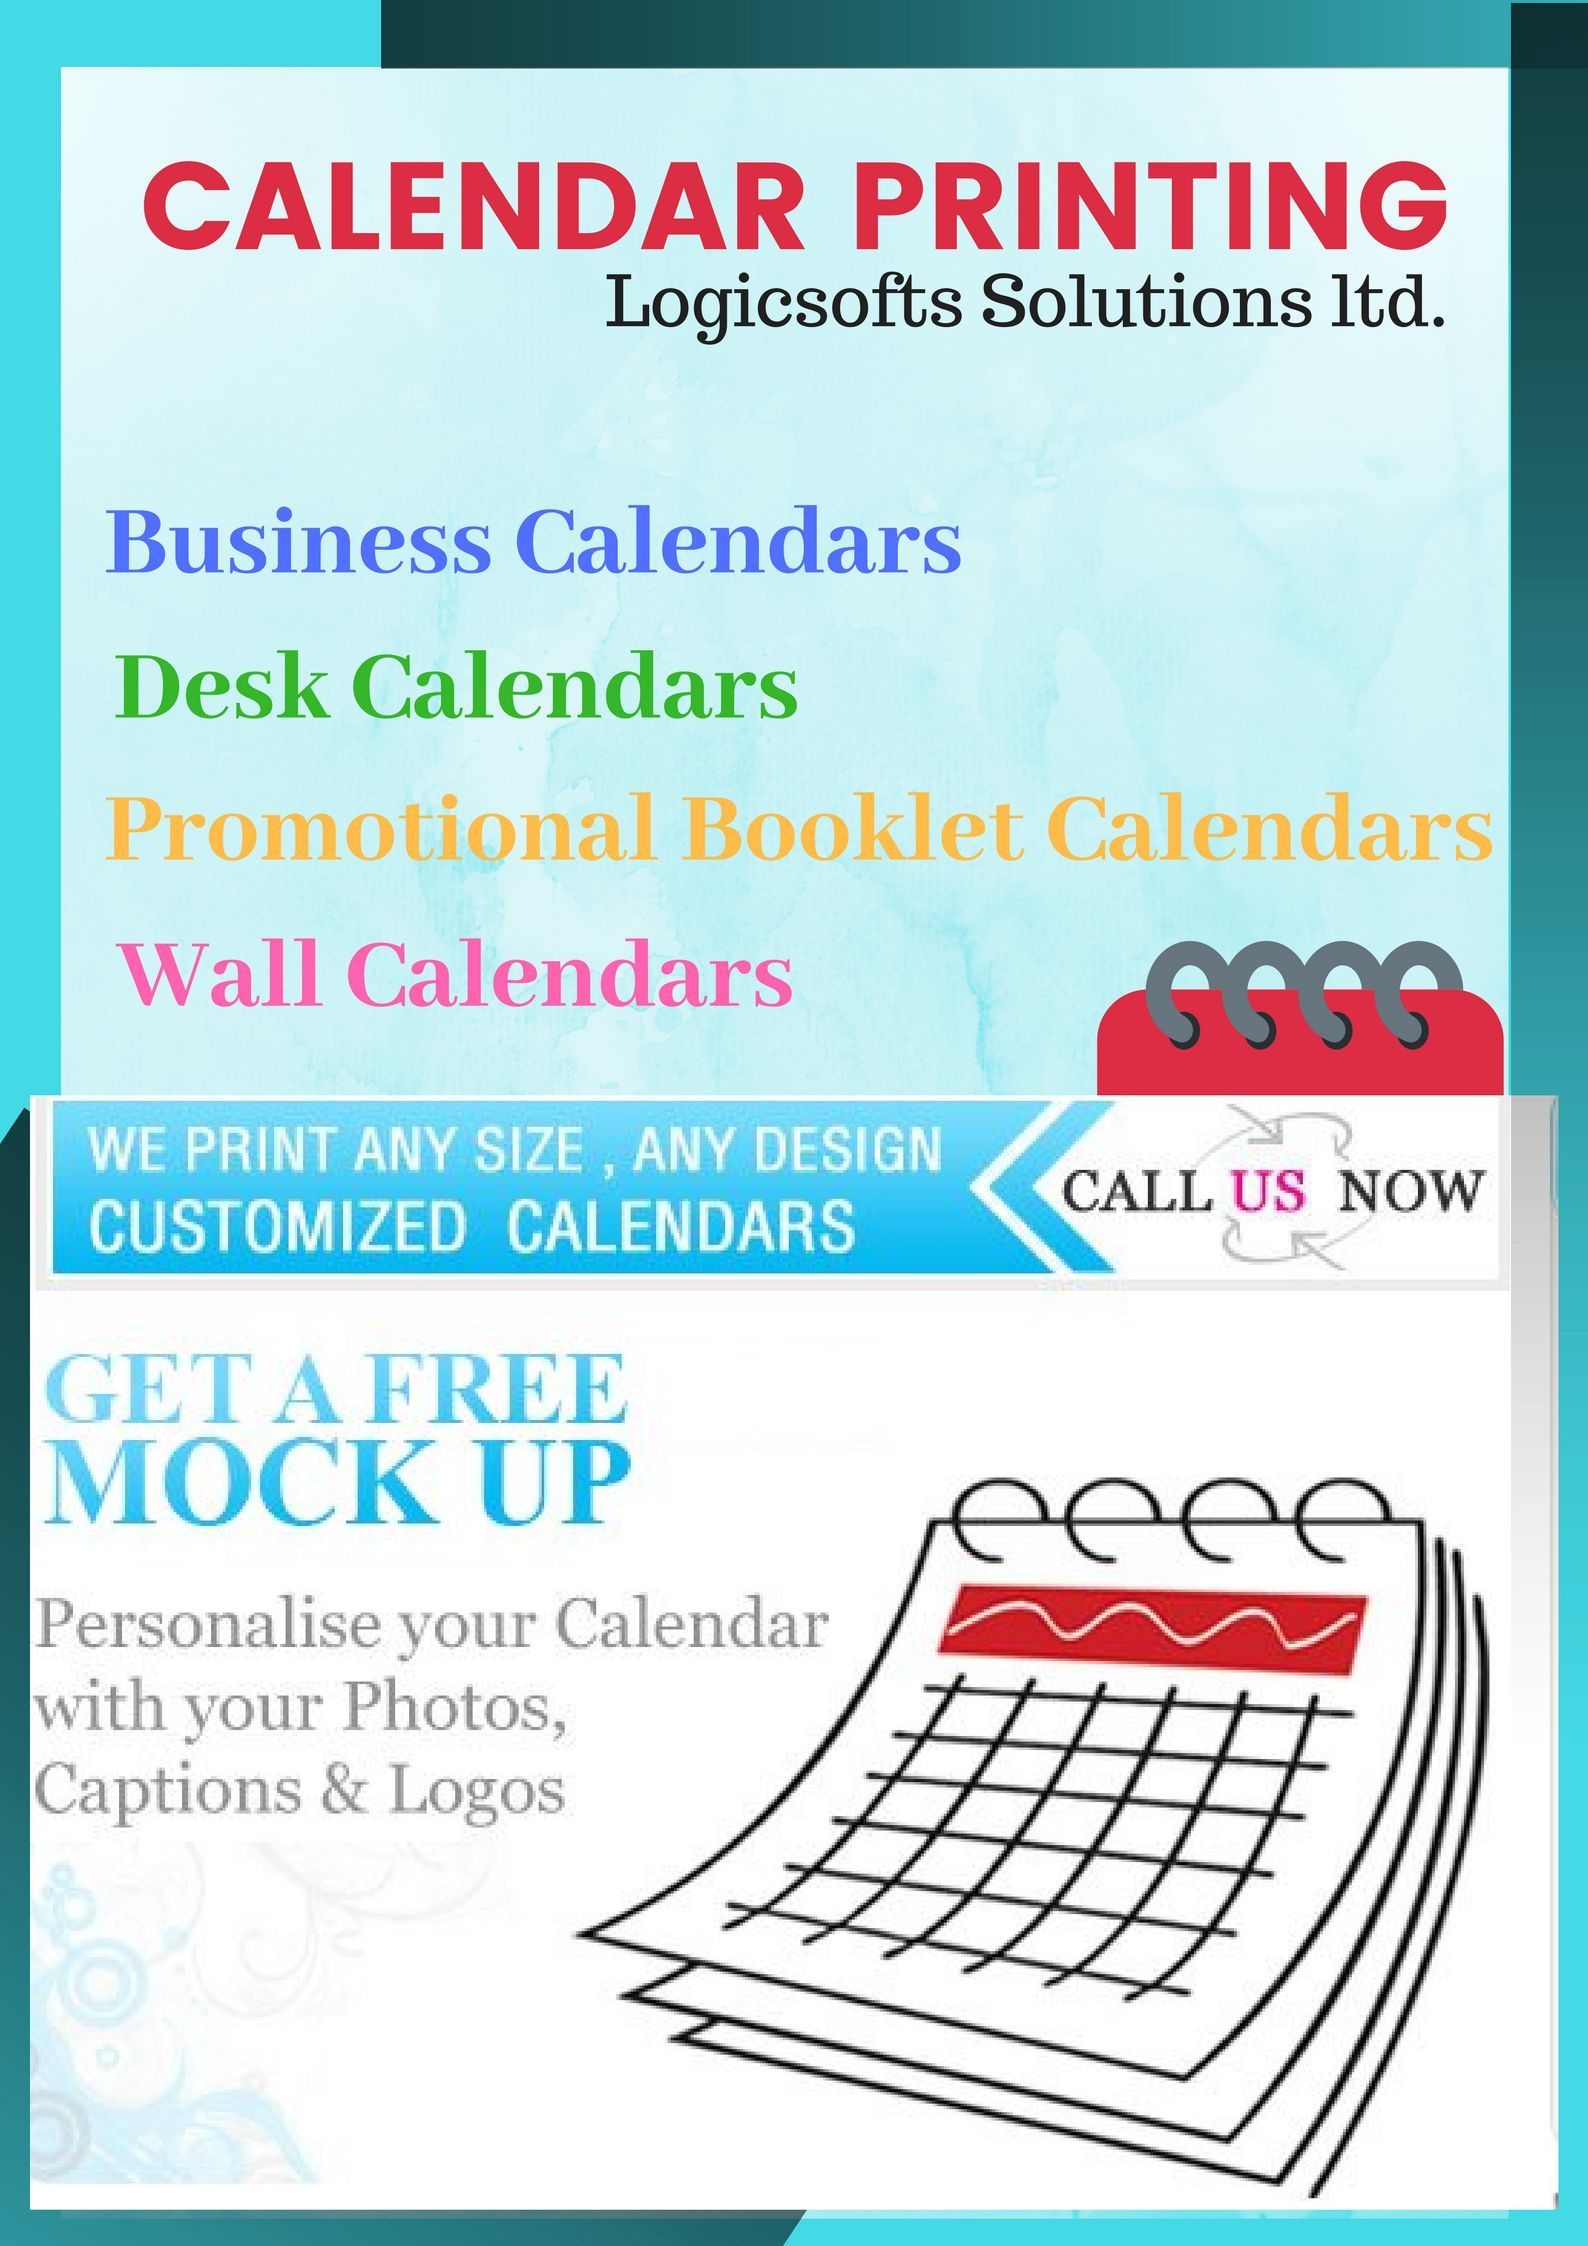 Calendar Printing Offers A Wide Range Of Designs And